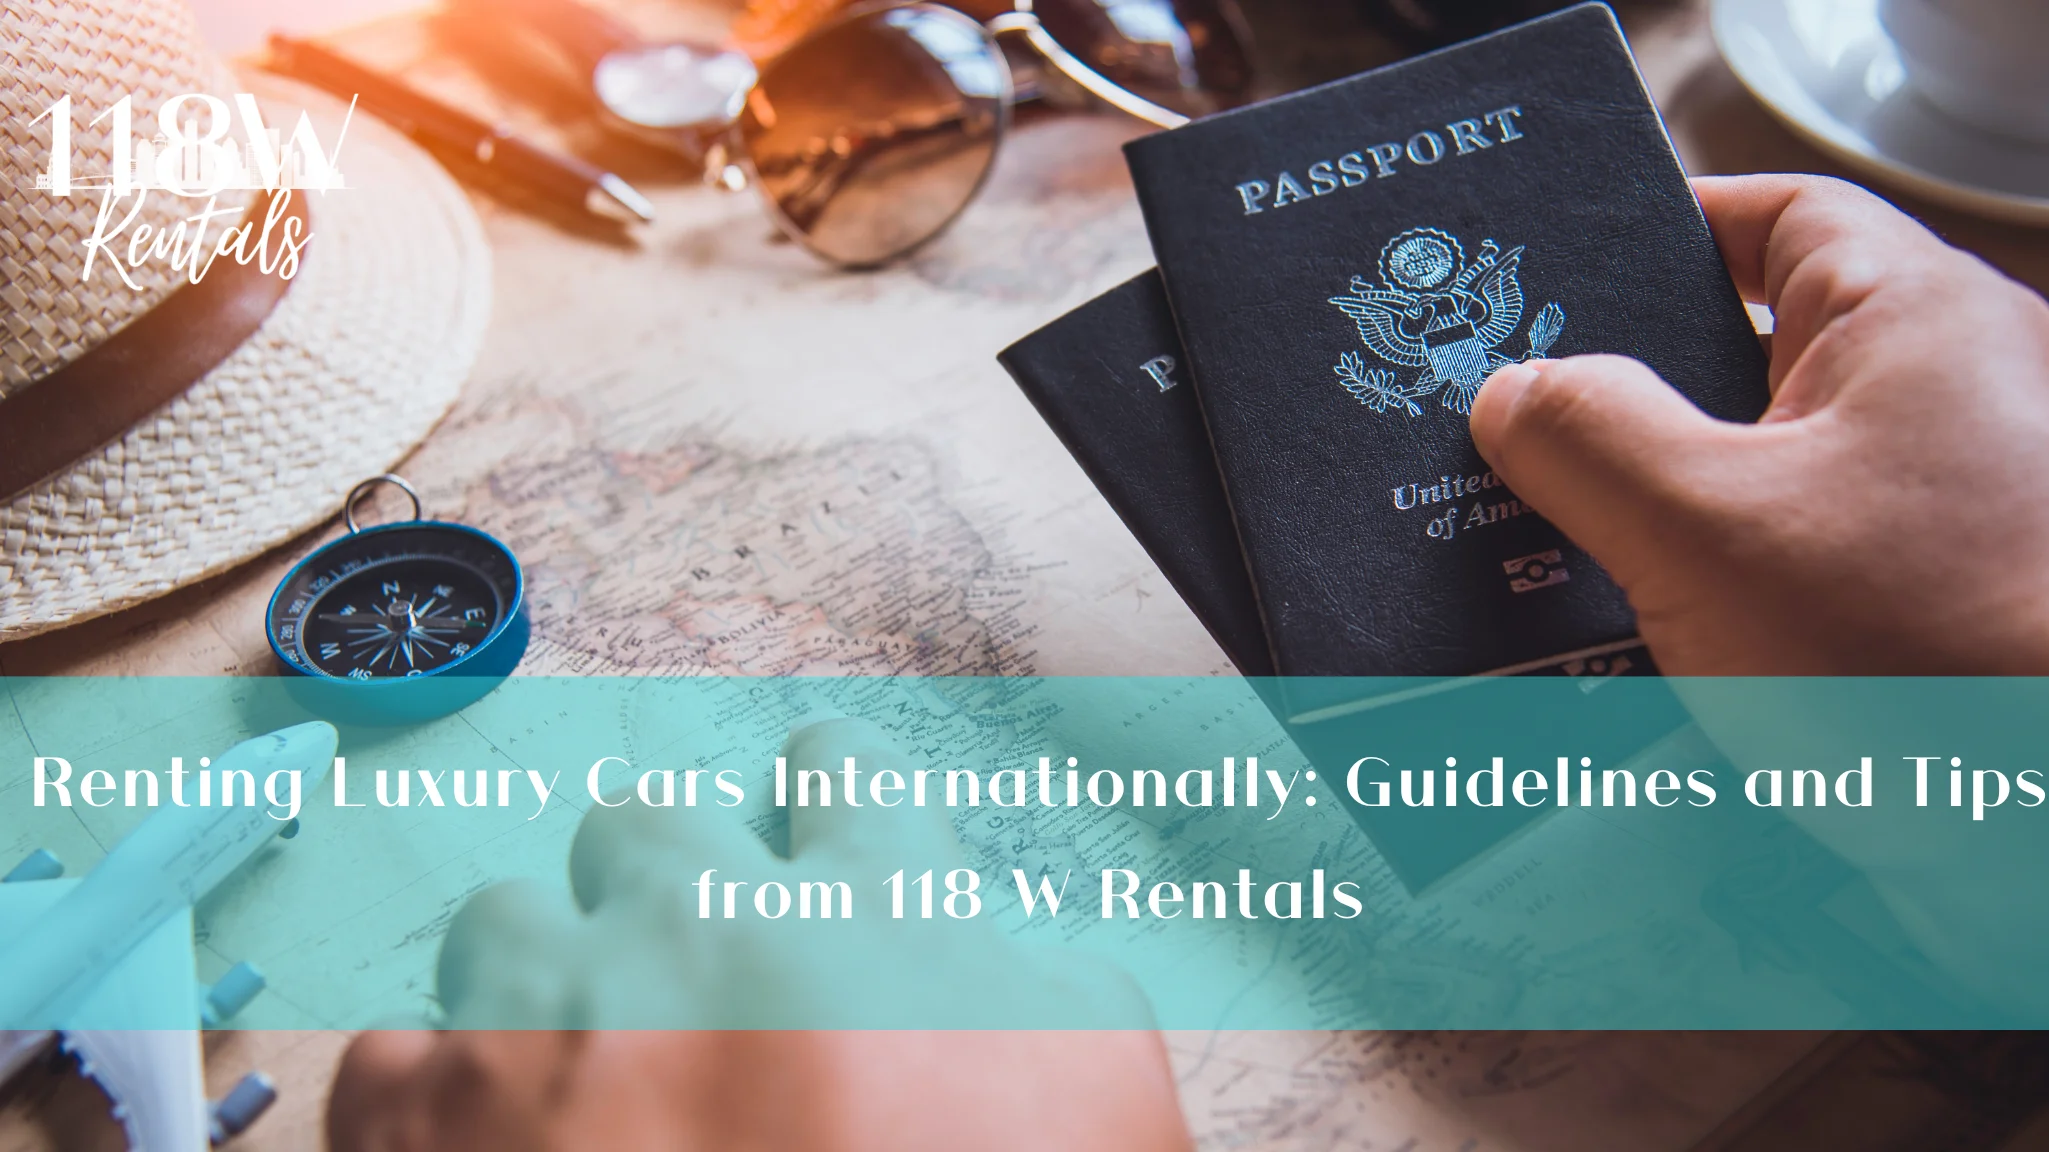 Renting Luxury Cars Internationally: Guidelines and Tips from 118 W Rentals